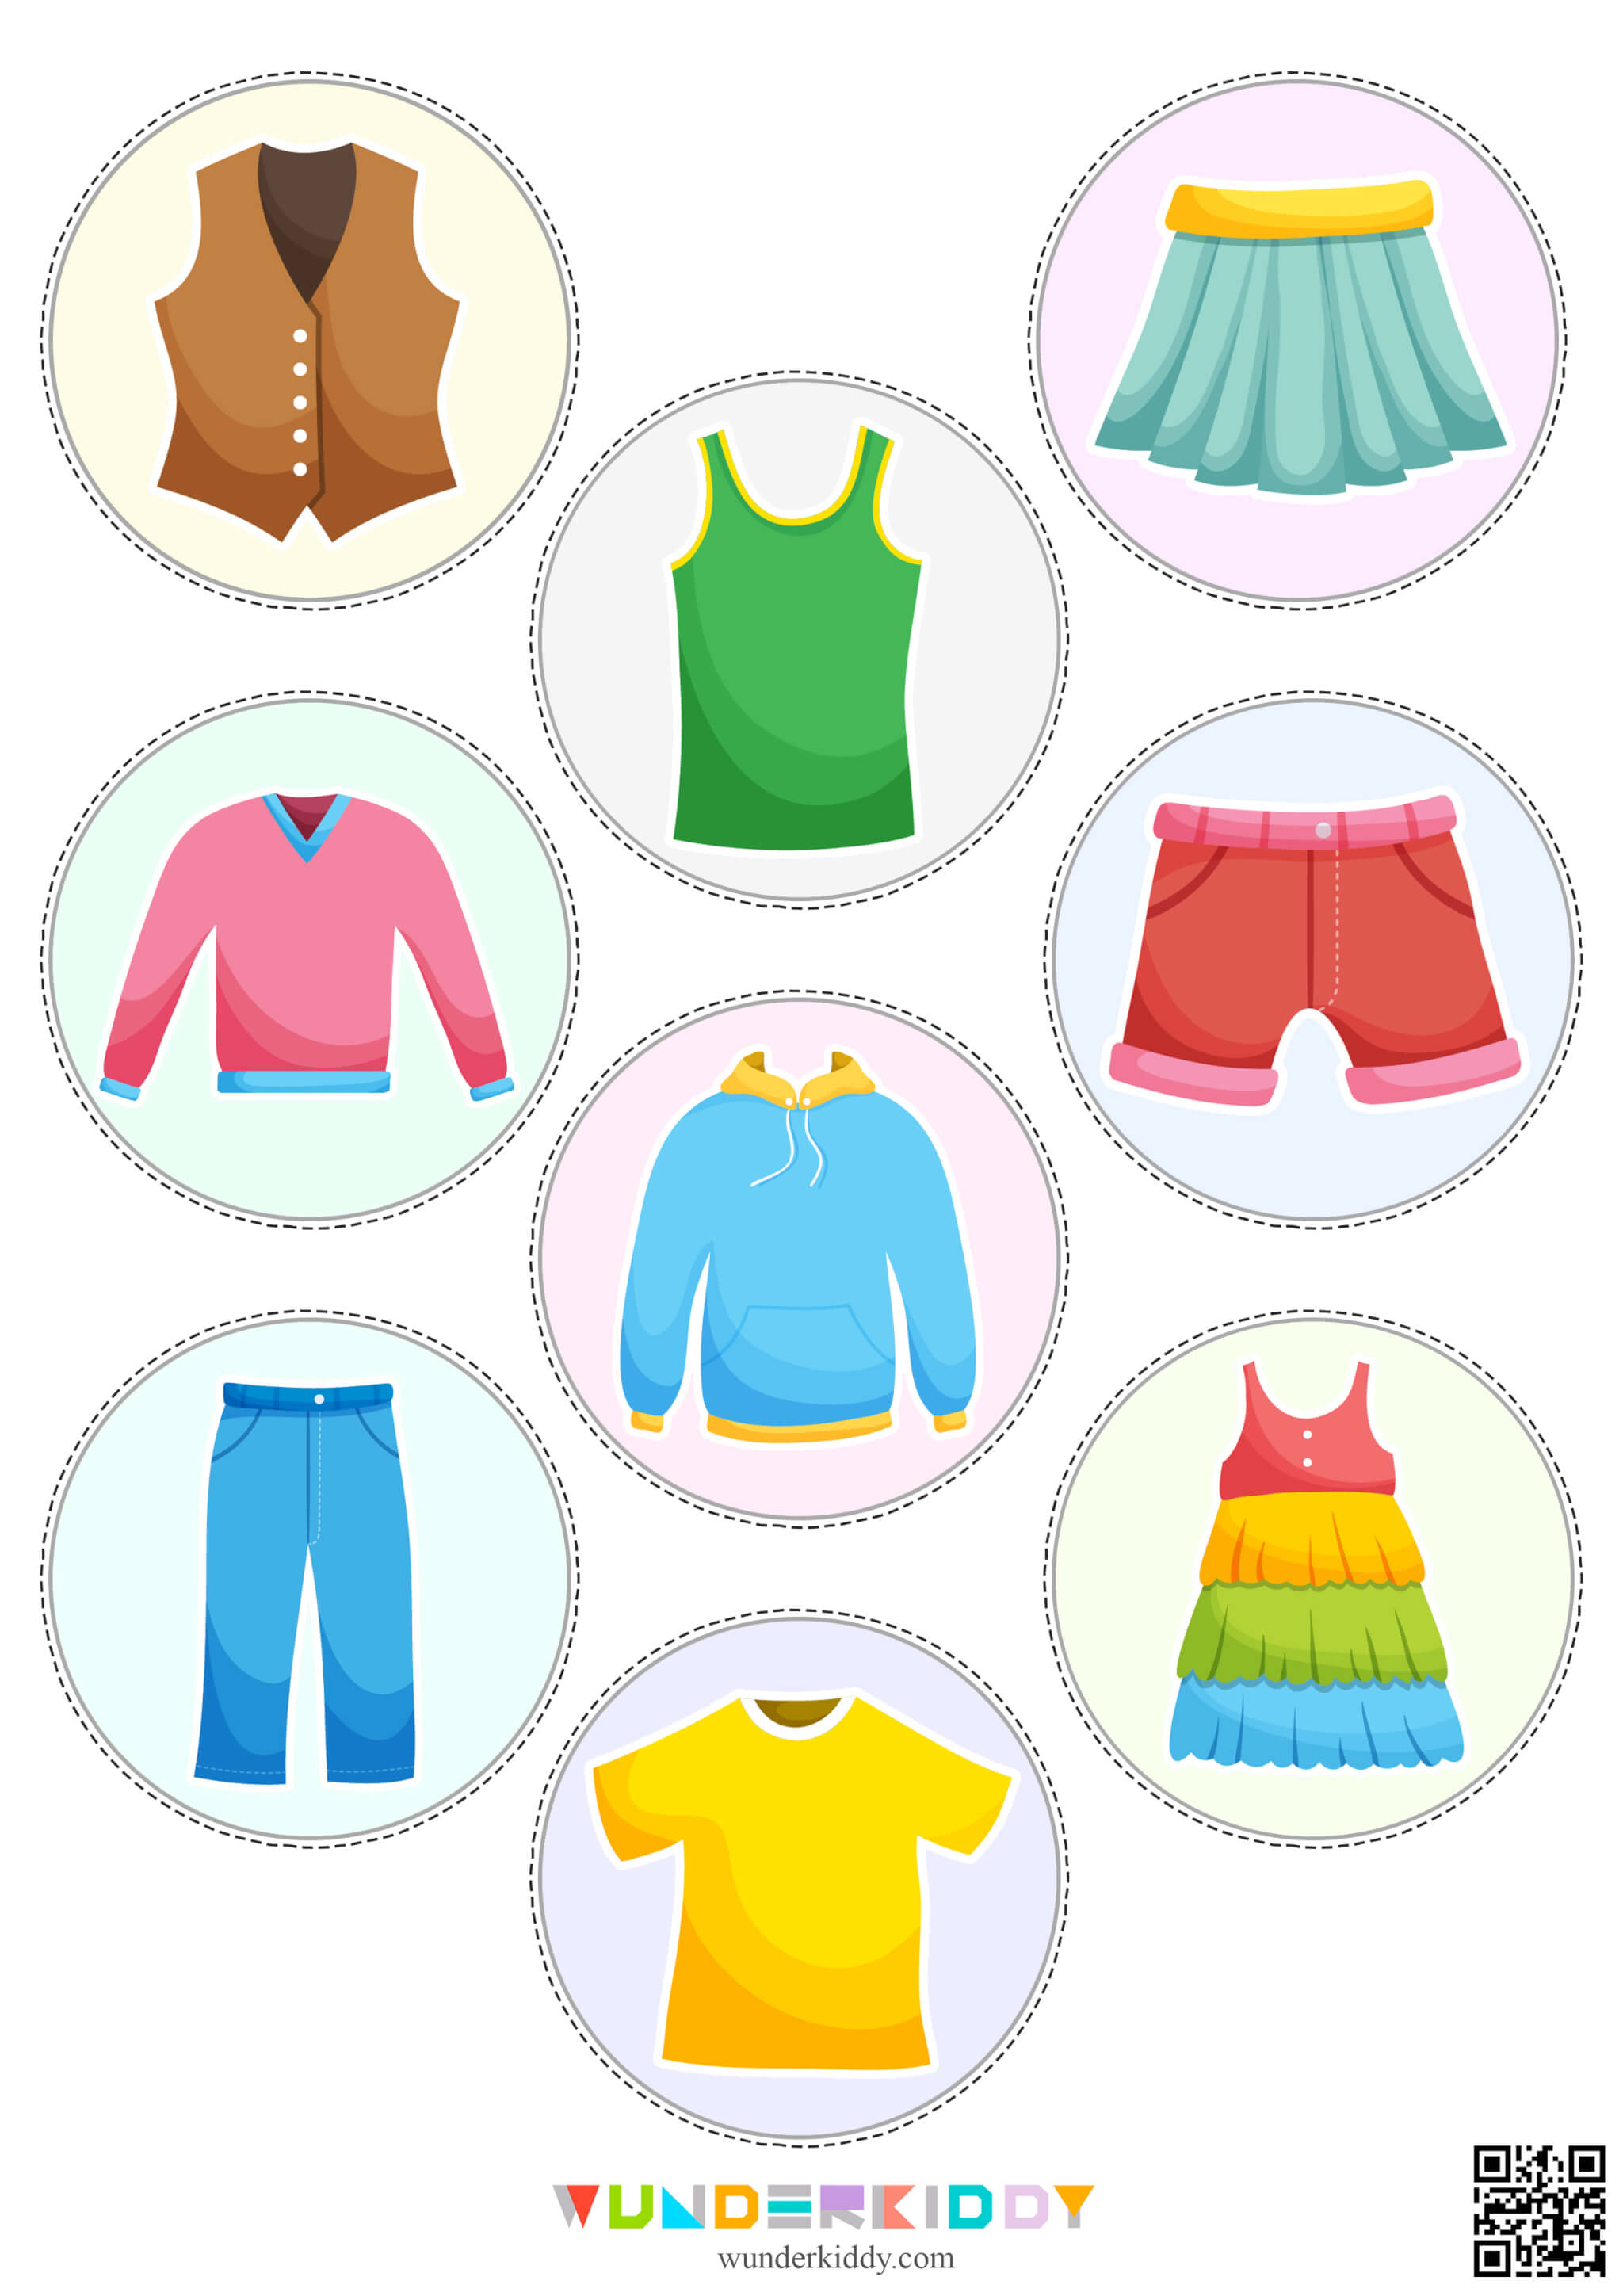 Clean and Dirty Laundry Sorting Activity - Image 4